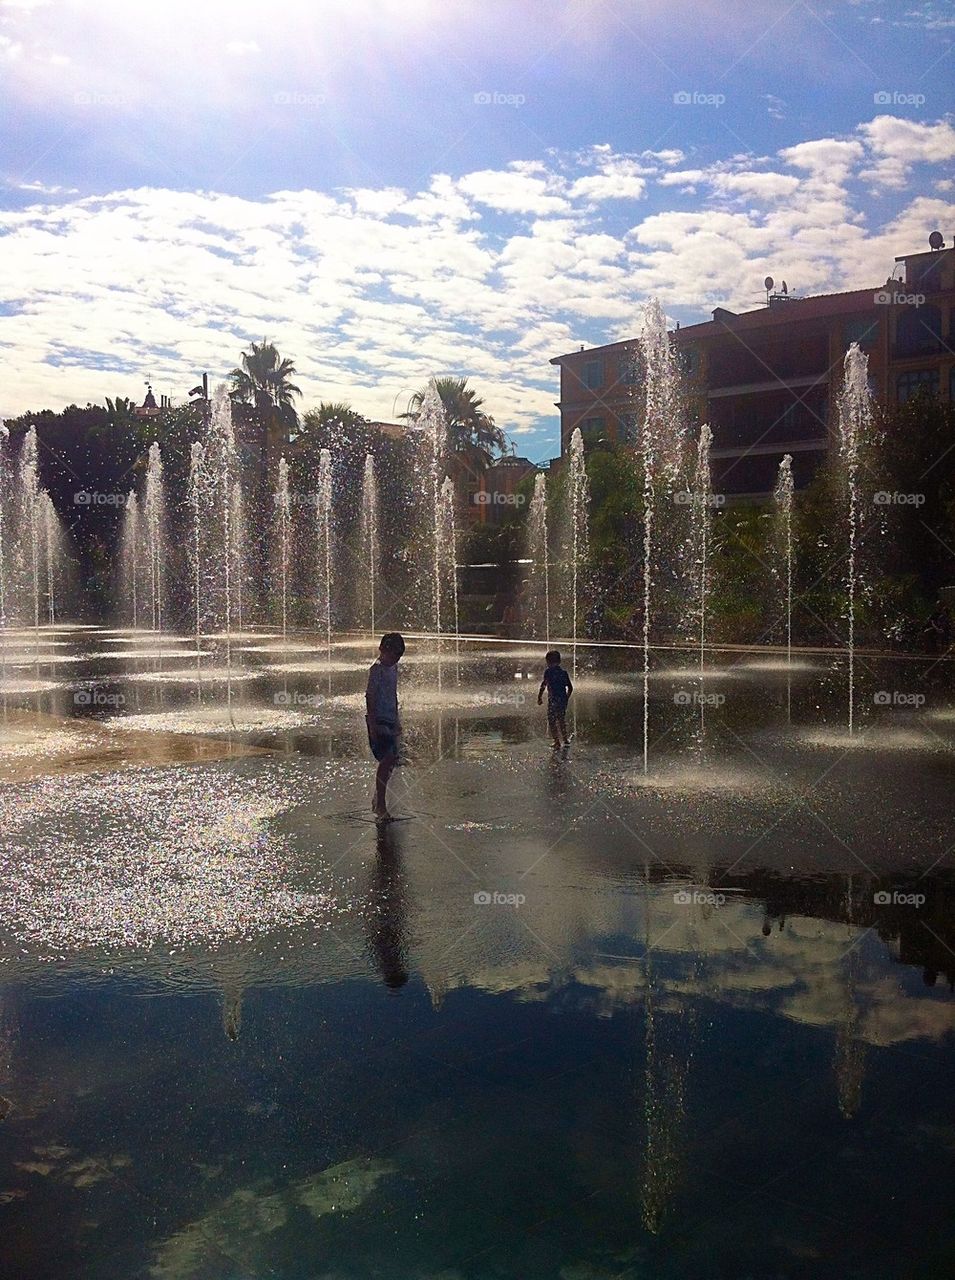 Playing in the fountains